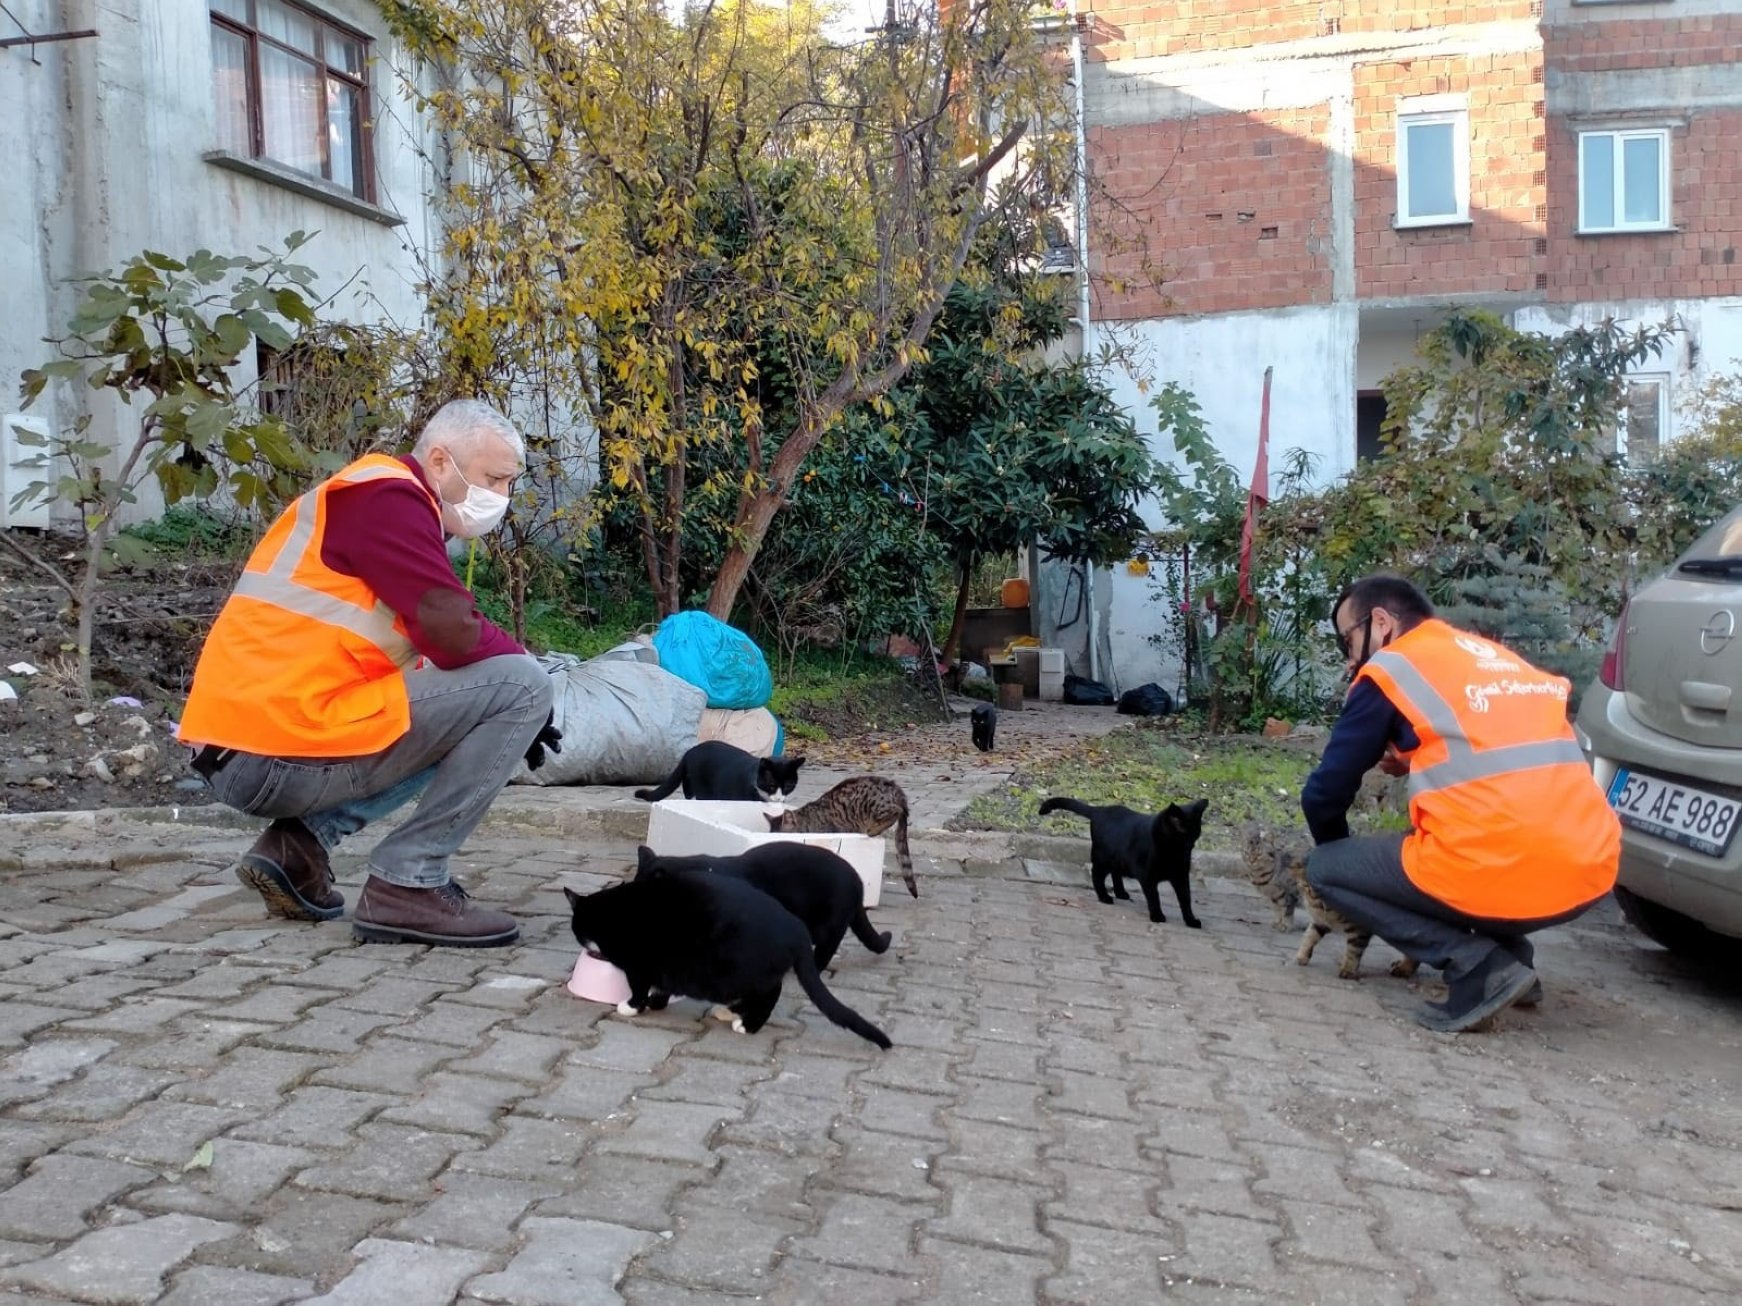 In photos: Turkey takes care of stray animals amid lockdown | Daily Sabah